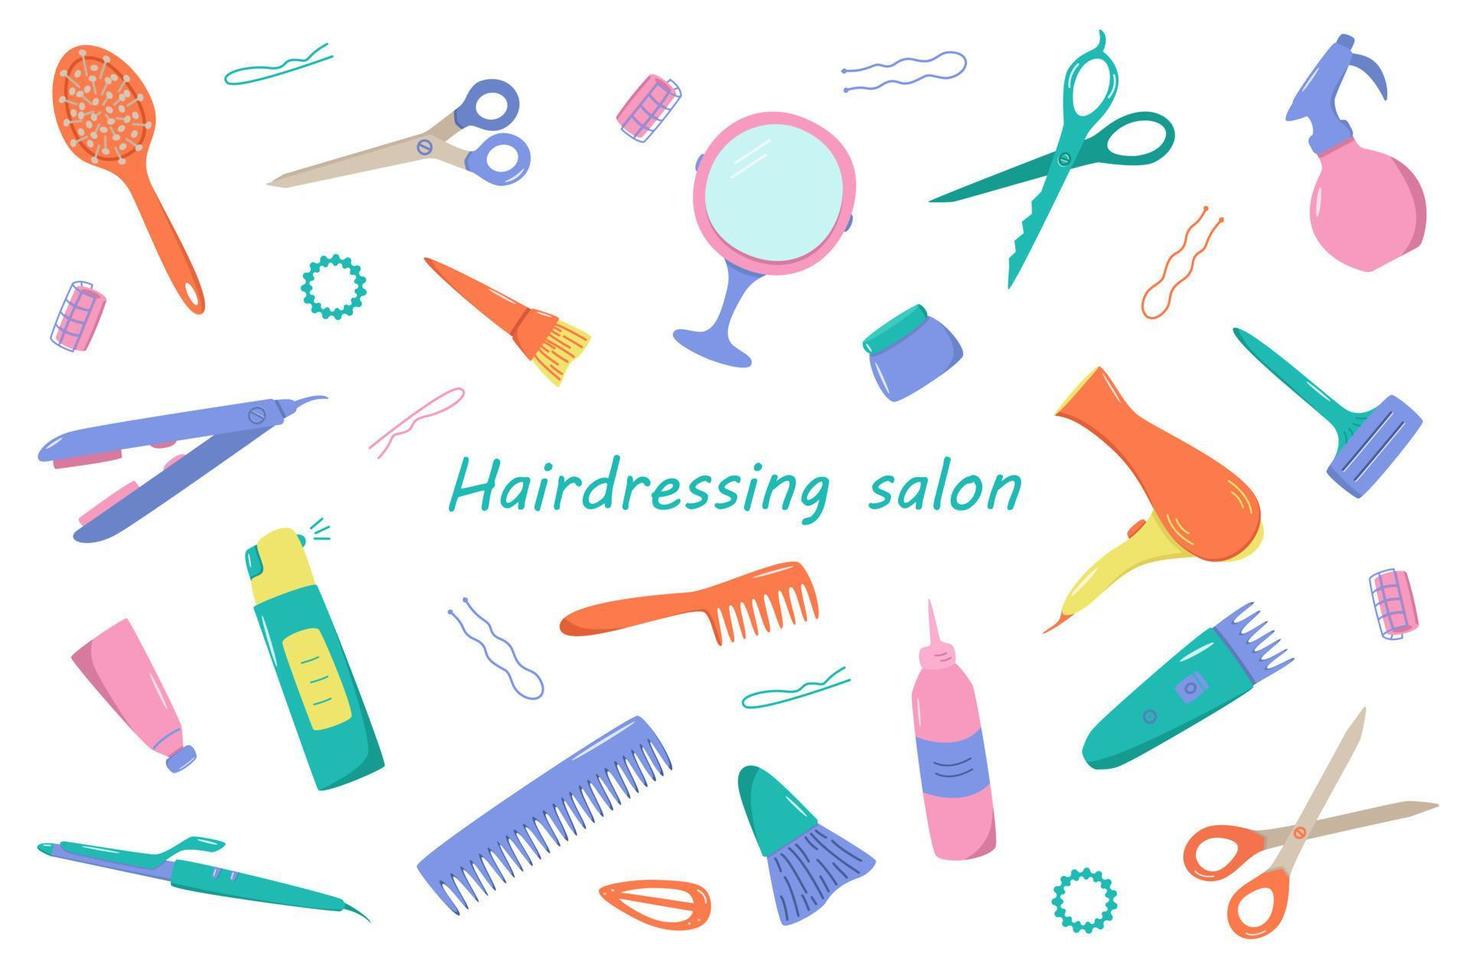 Hairdressing tool kit for beauty salon or home use. Vector illustration of doodle icons for self and hair care. Comb, razor, hair dryer, curling iron and other items